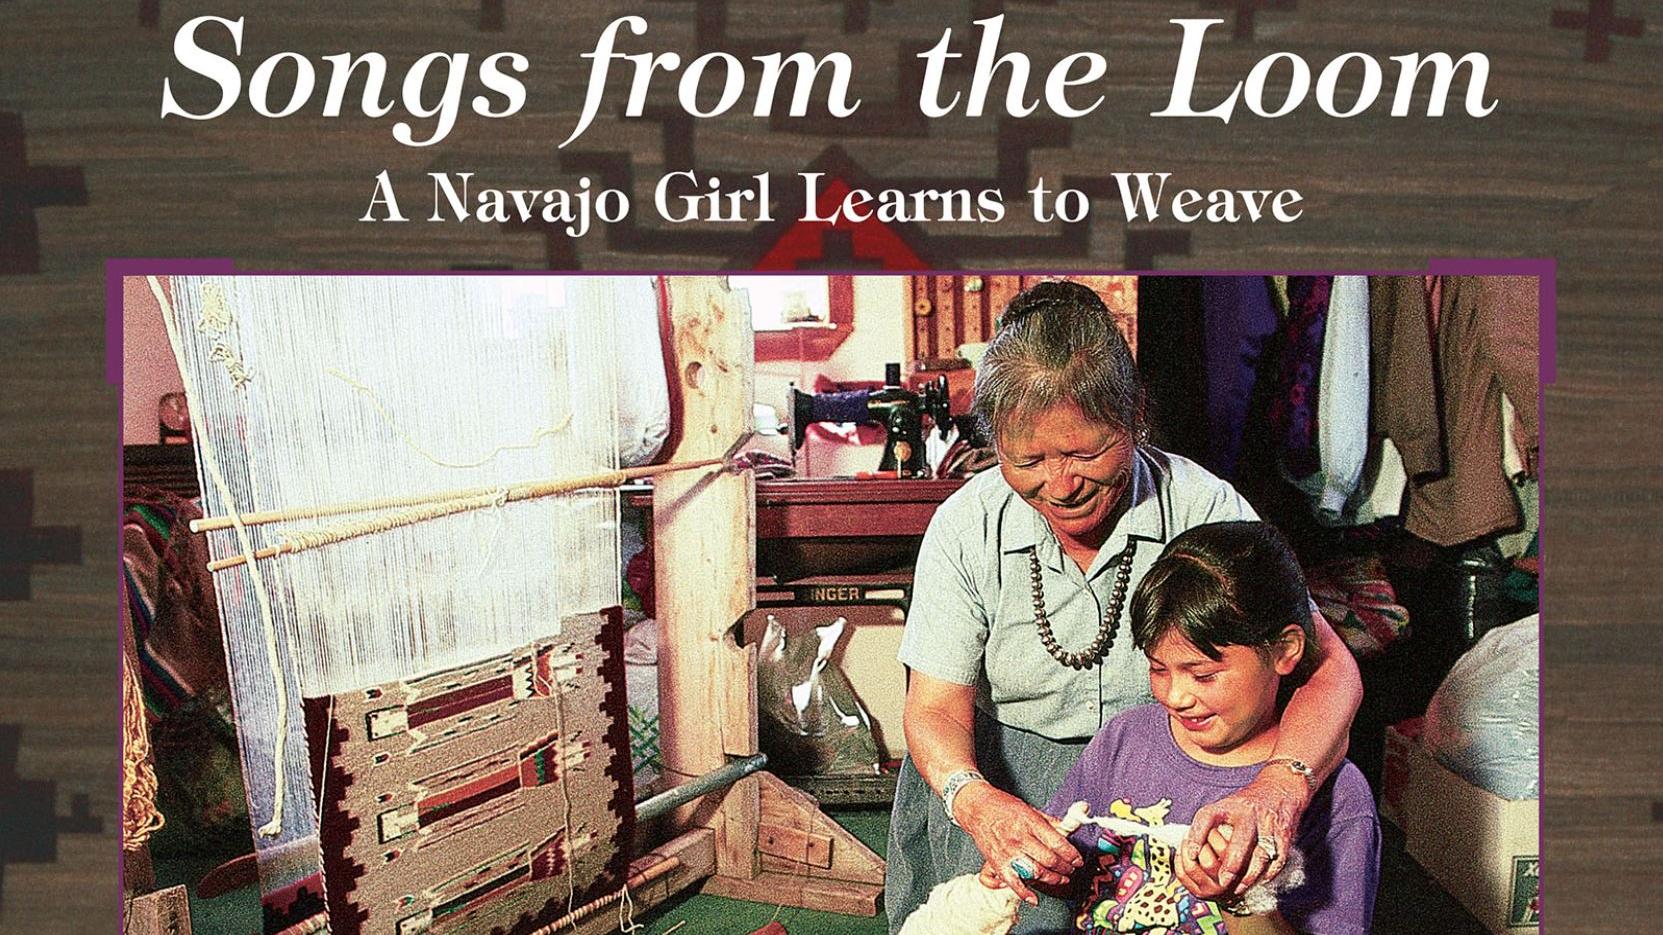 The cover of "Songs from the Loom: A Navajo Girl Learns to Weave," by Monty Roessel. The cover features an image of a child weaving with the help of an older woman.